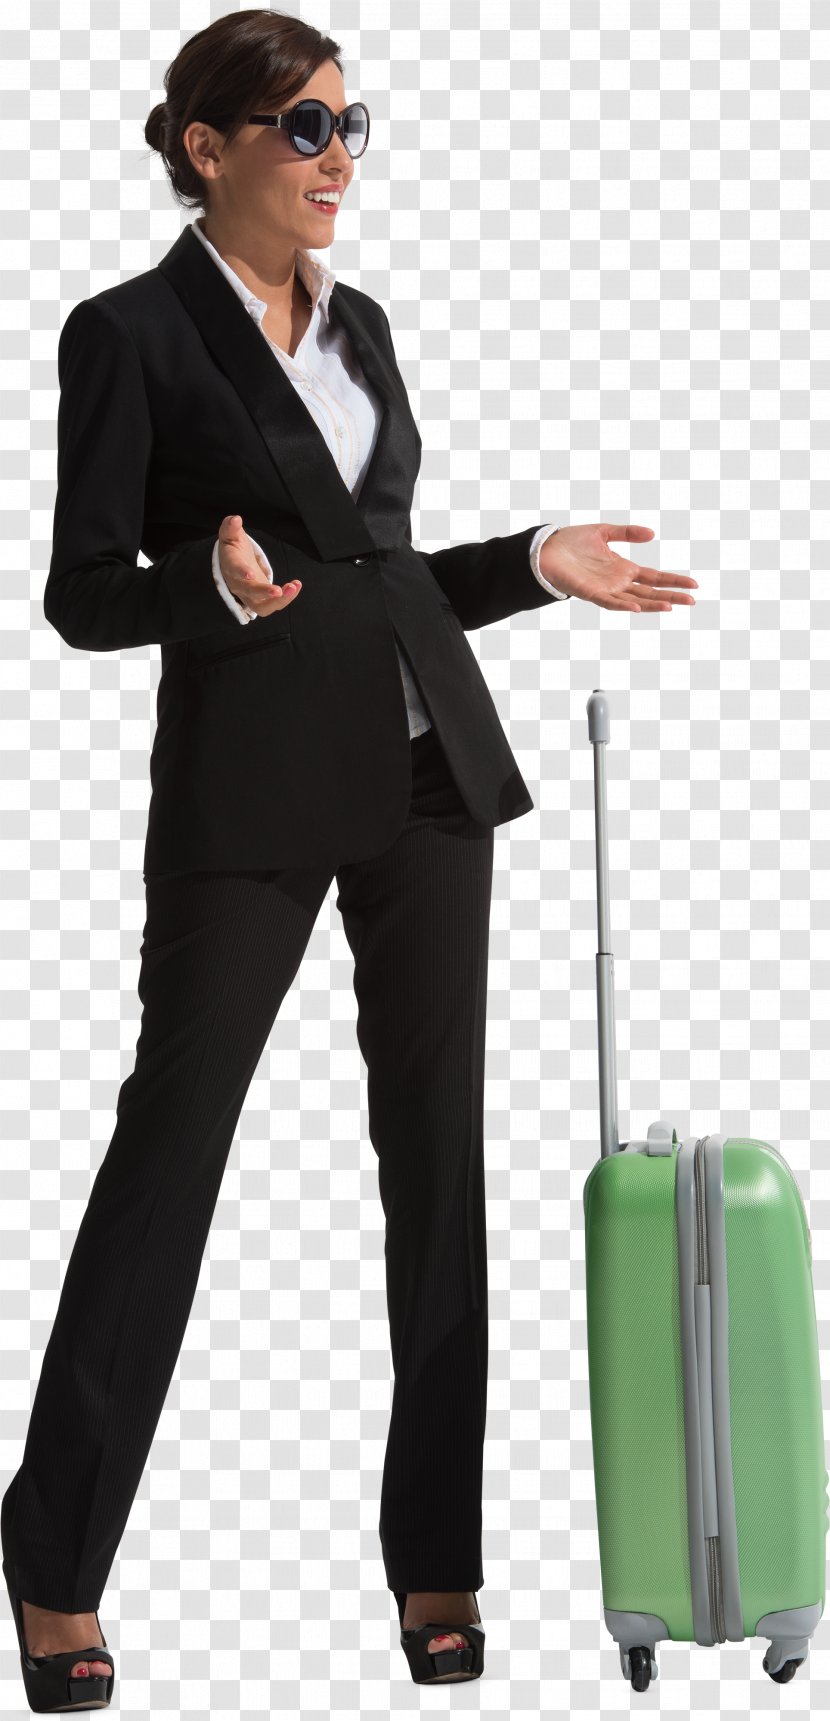 Suitcase Baggage Download - Businessperson - Peoples Transparent PNG